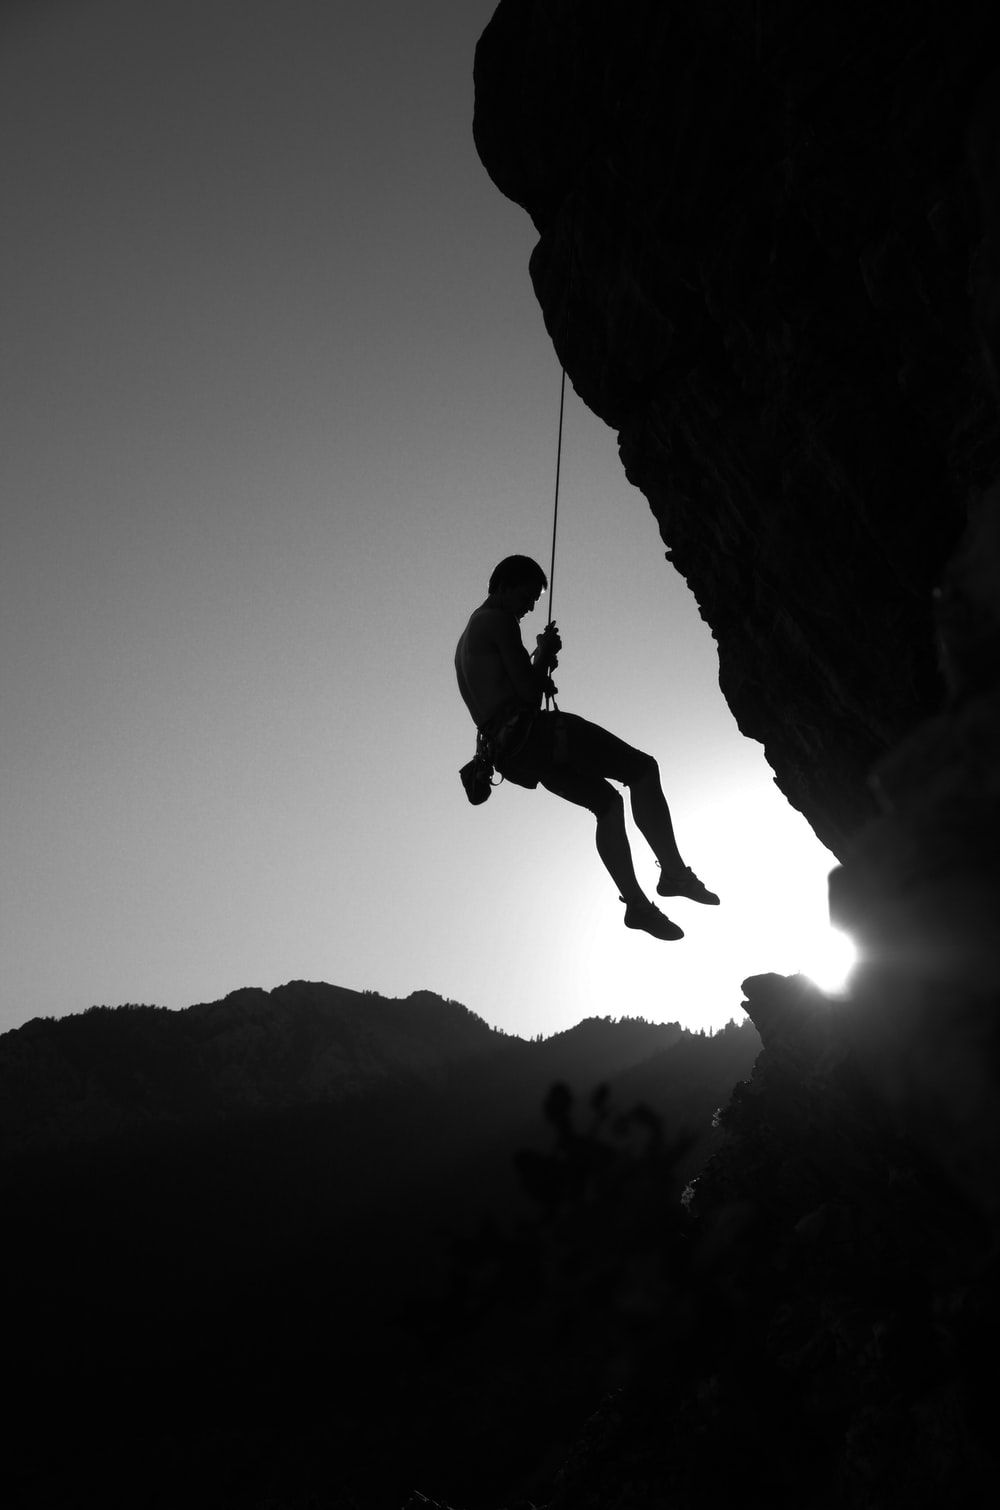 Rock Climbing Picture. Download Free Image